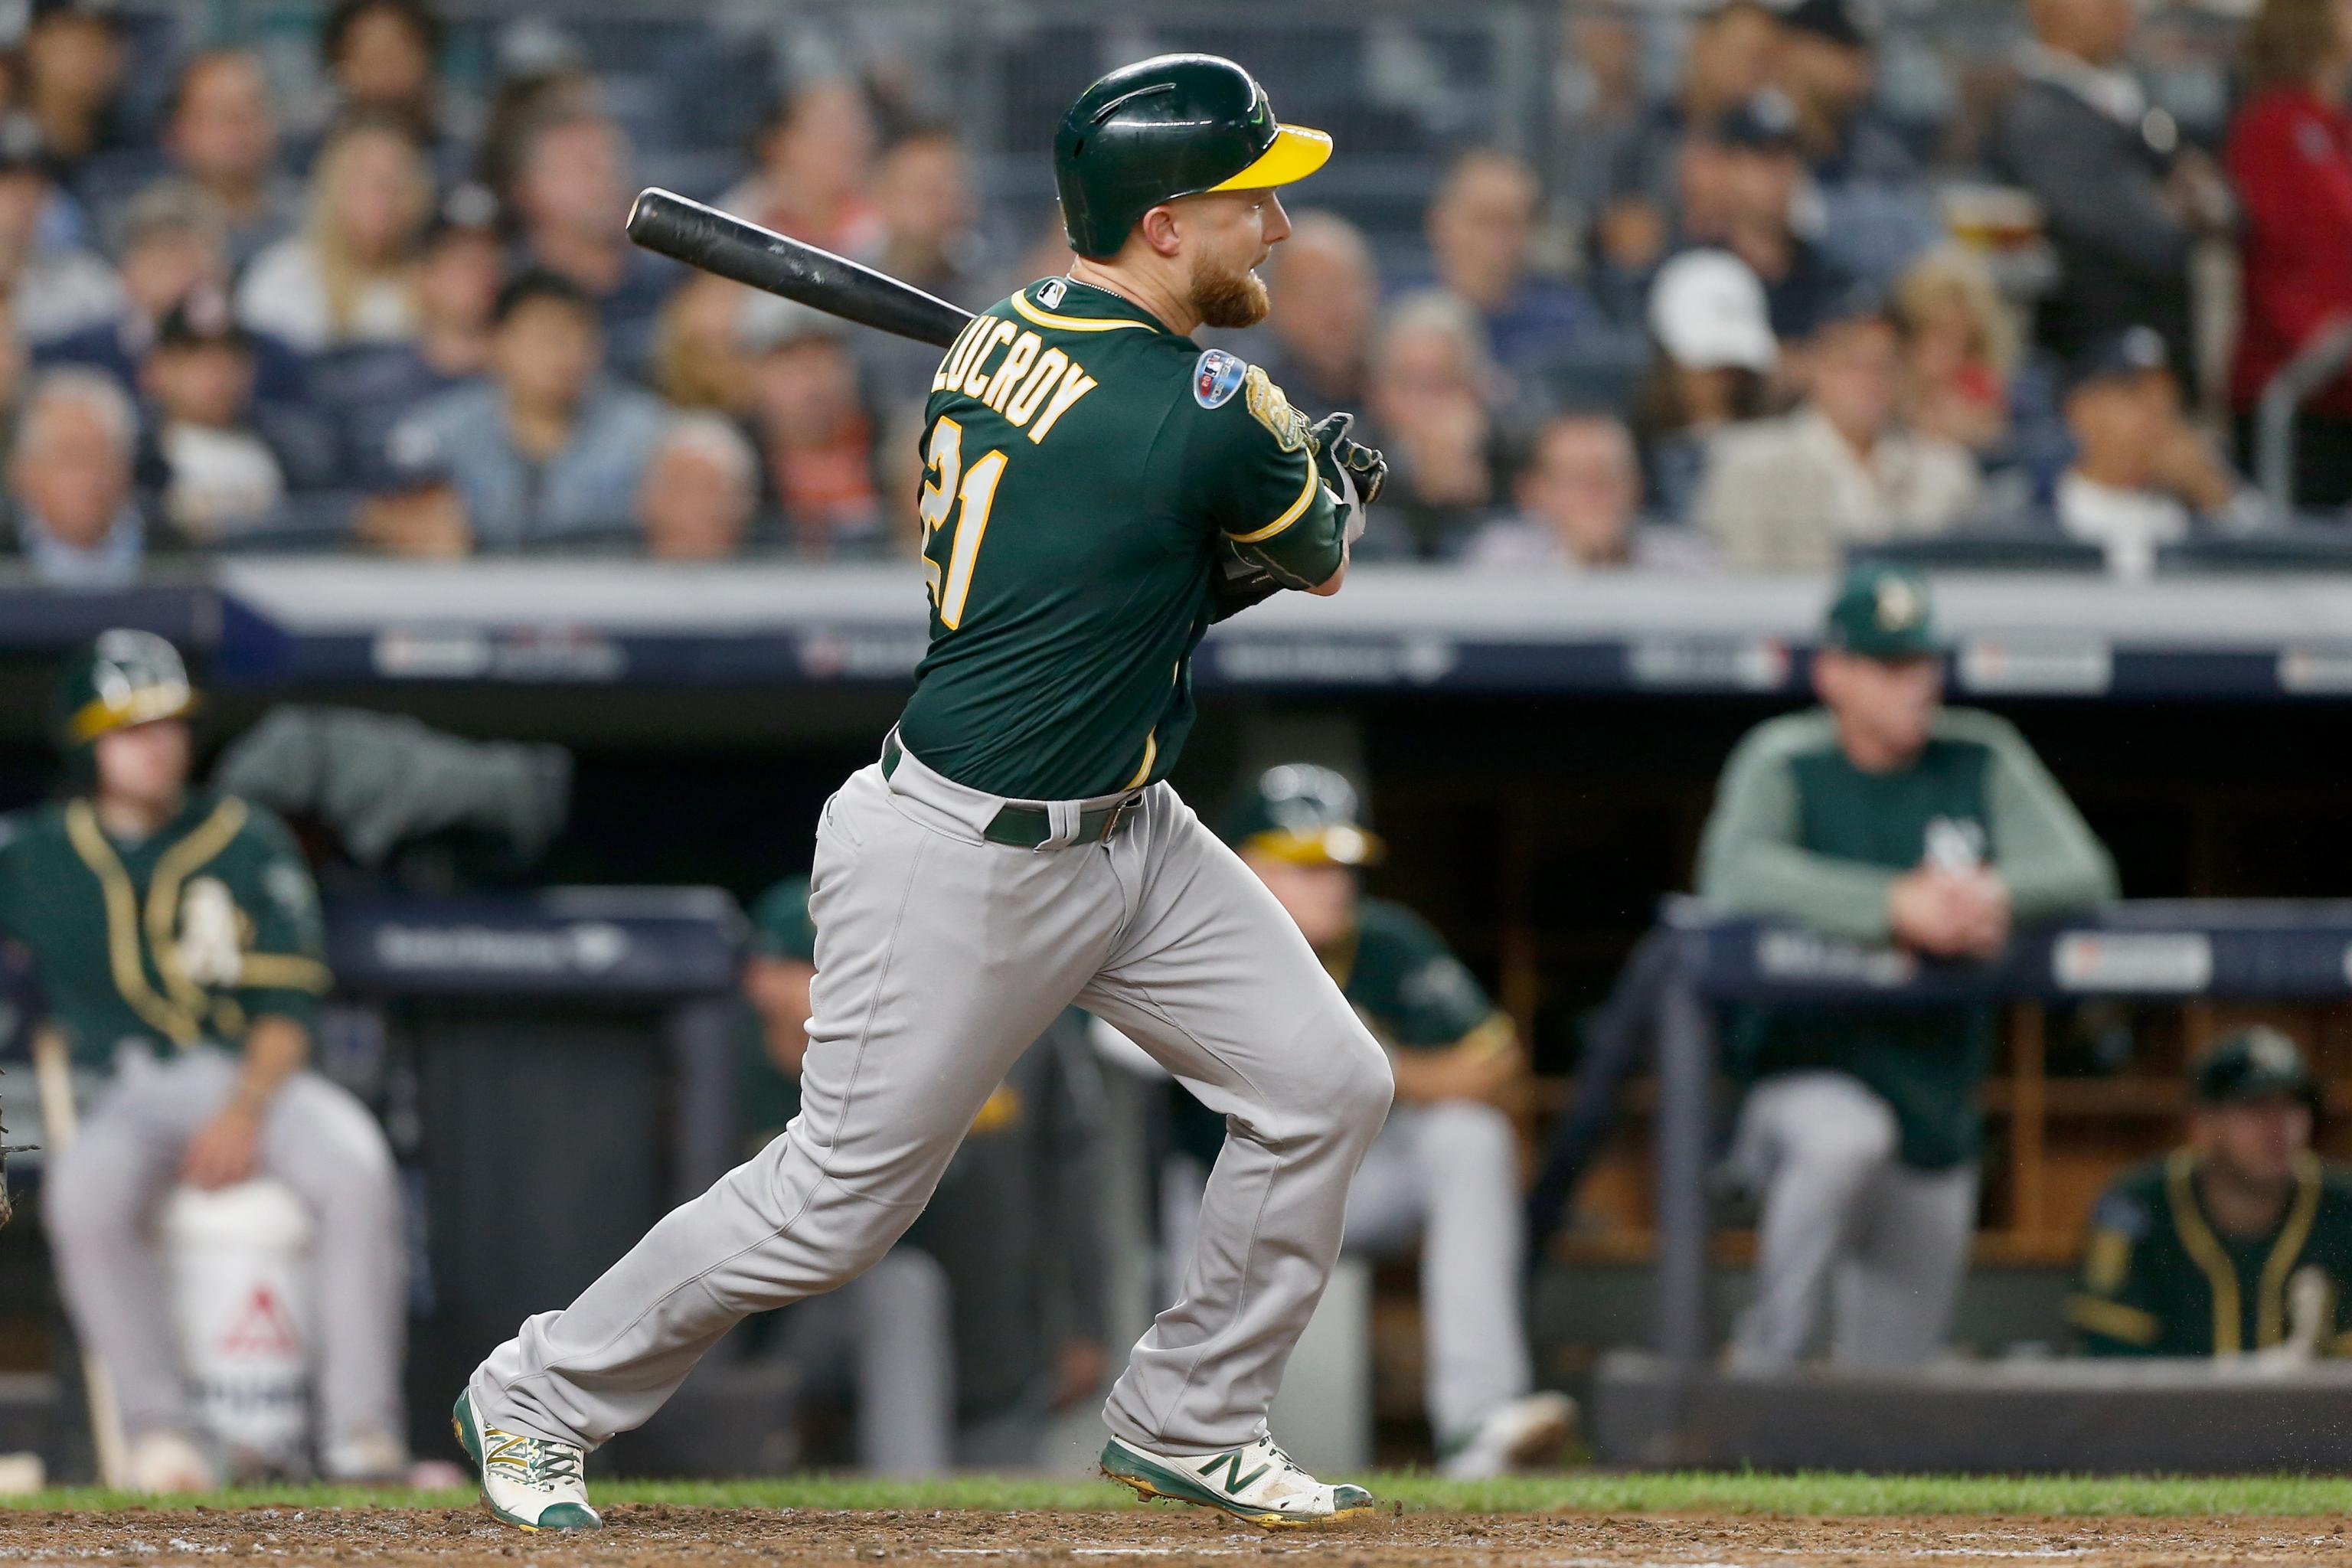 Jonathan Lucroy making it tough to run on A's